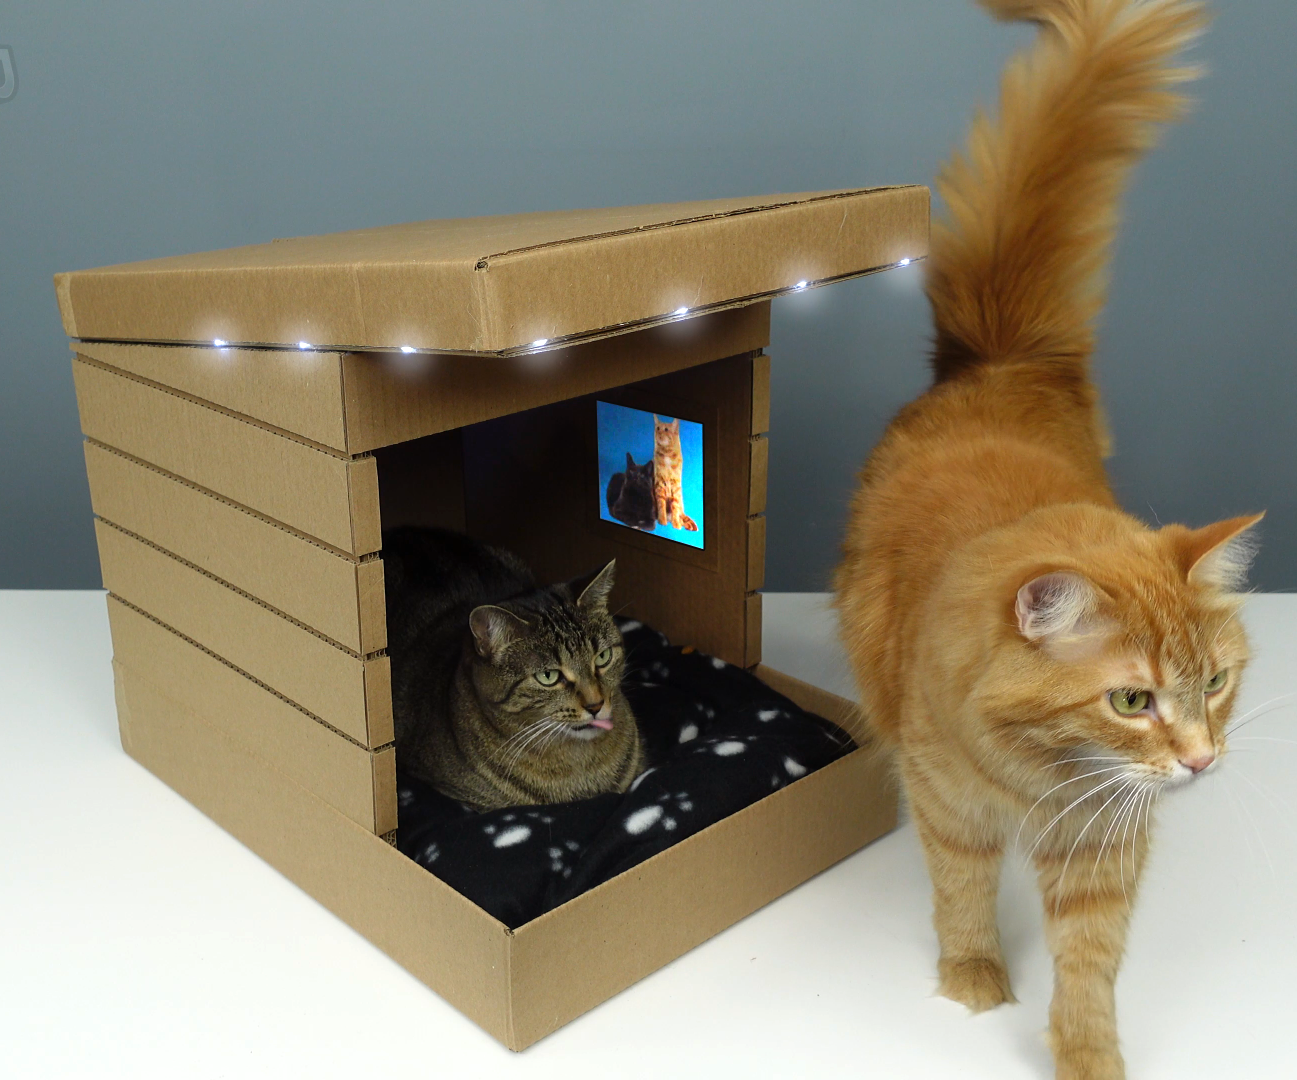 Modern Cardboard Pet House for Cats 🐱